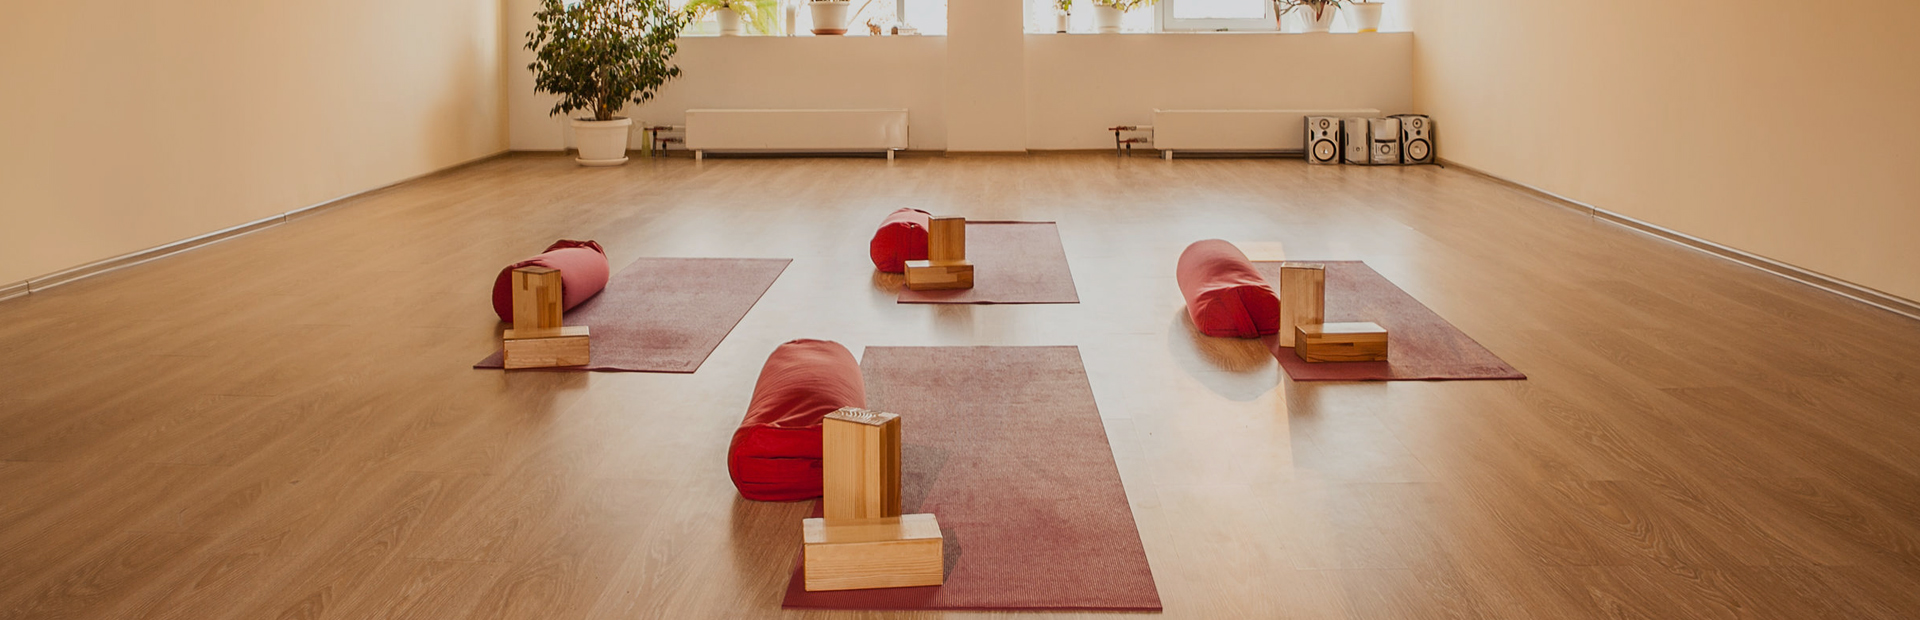 A group exercise studio used for yoga and Pilates